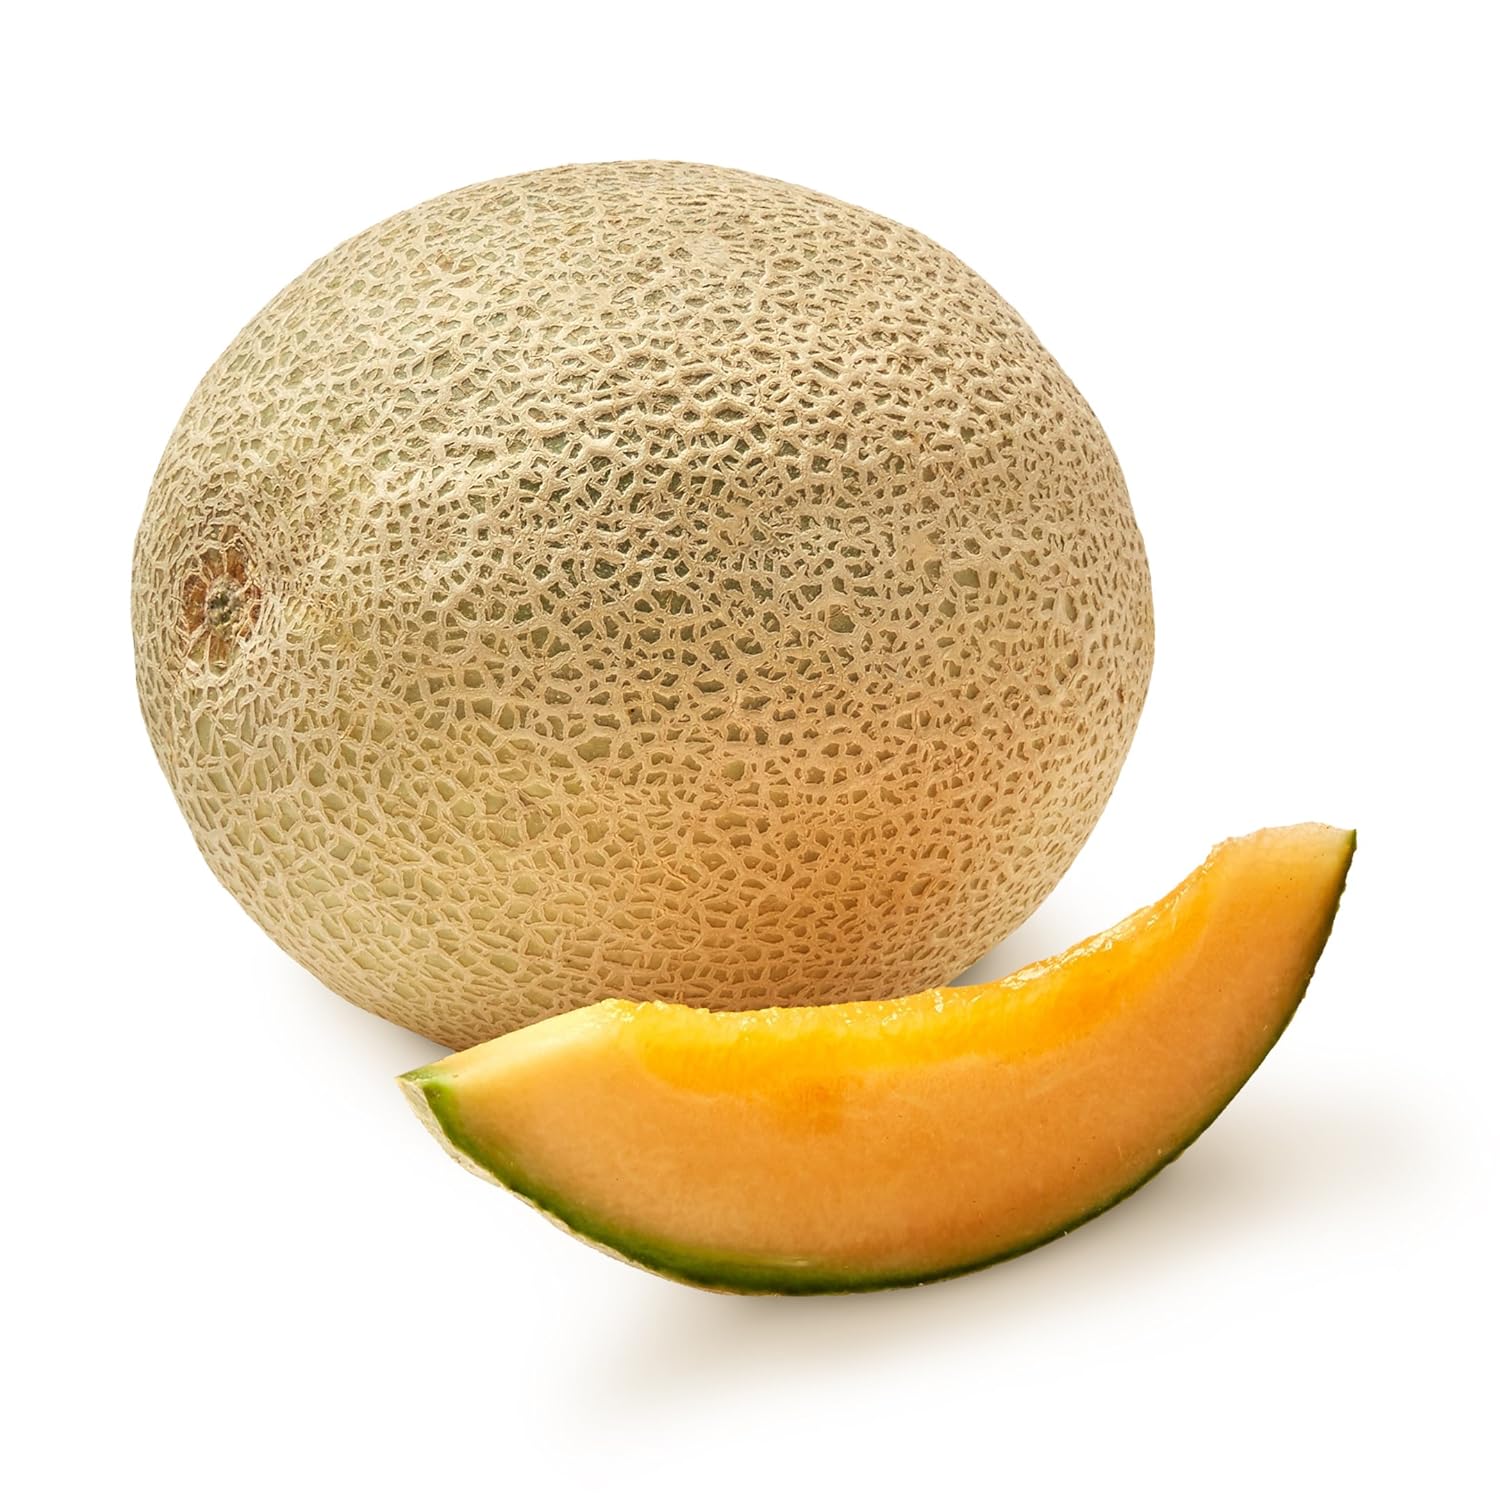 "Cantaloupe: The Sweet and Nutritious Superfruit You Need to Try!"